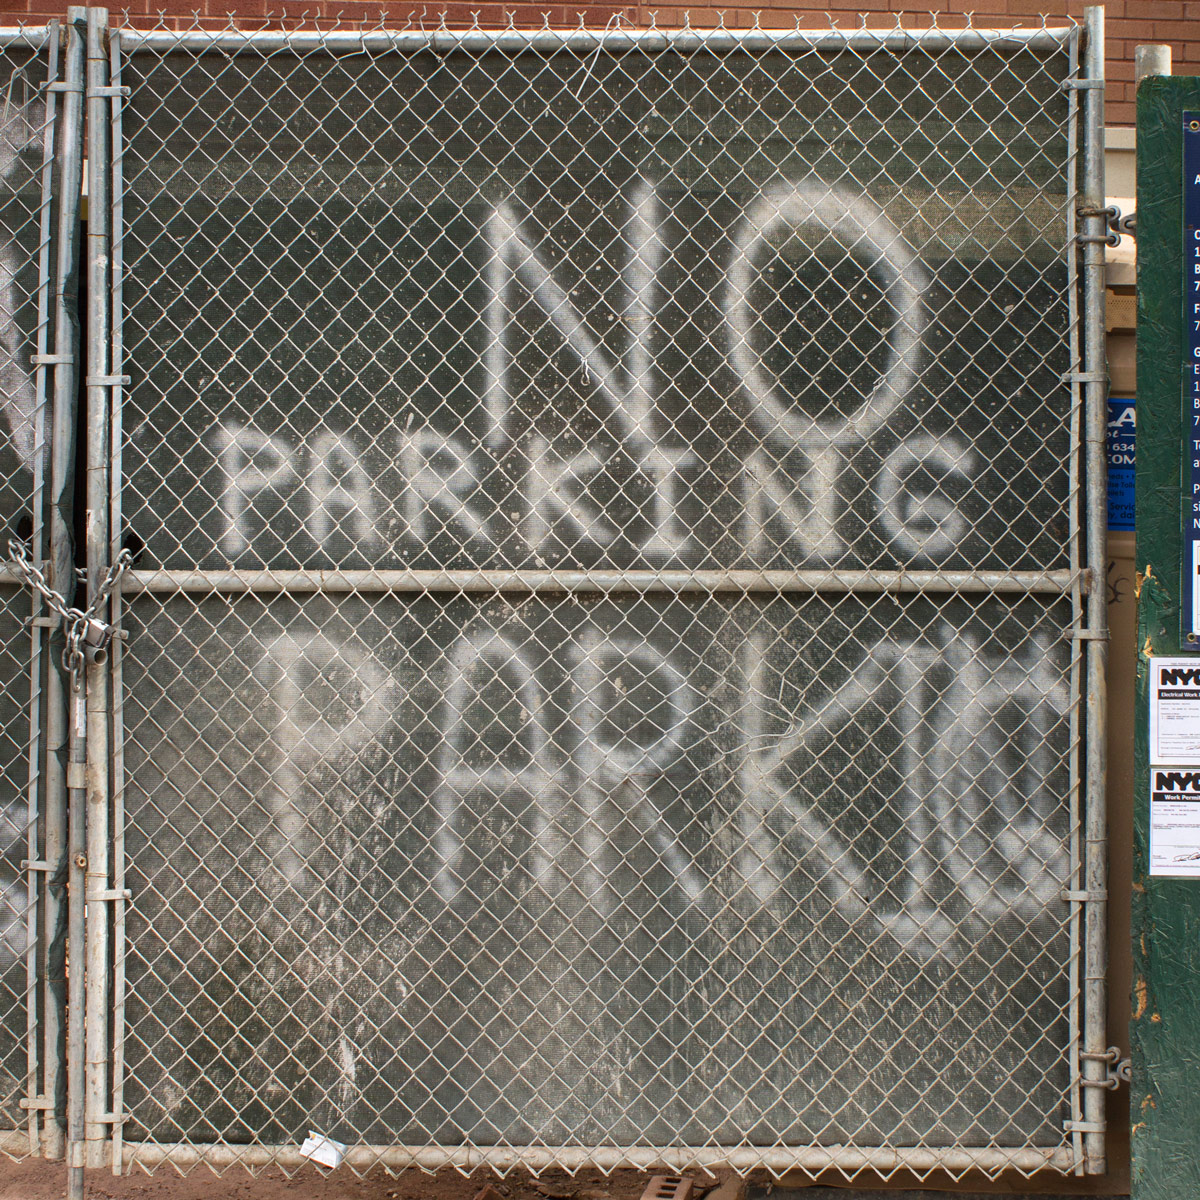 Spray-painted ‘no parking’ sign where signmaker ran out of room and had to rewrite ‘parking’ a second time, above the first attempt and noticeably smaller